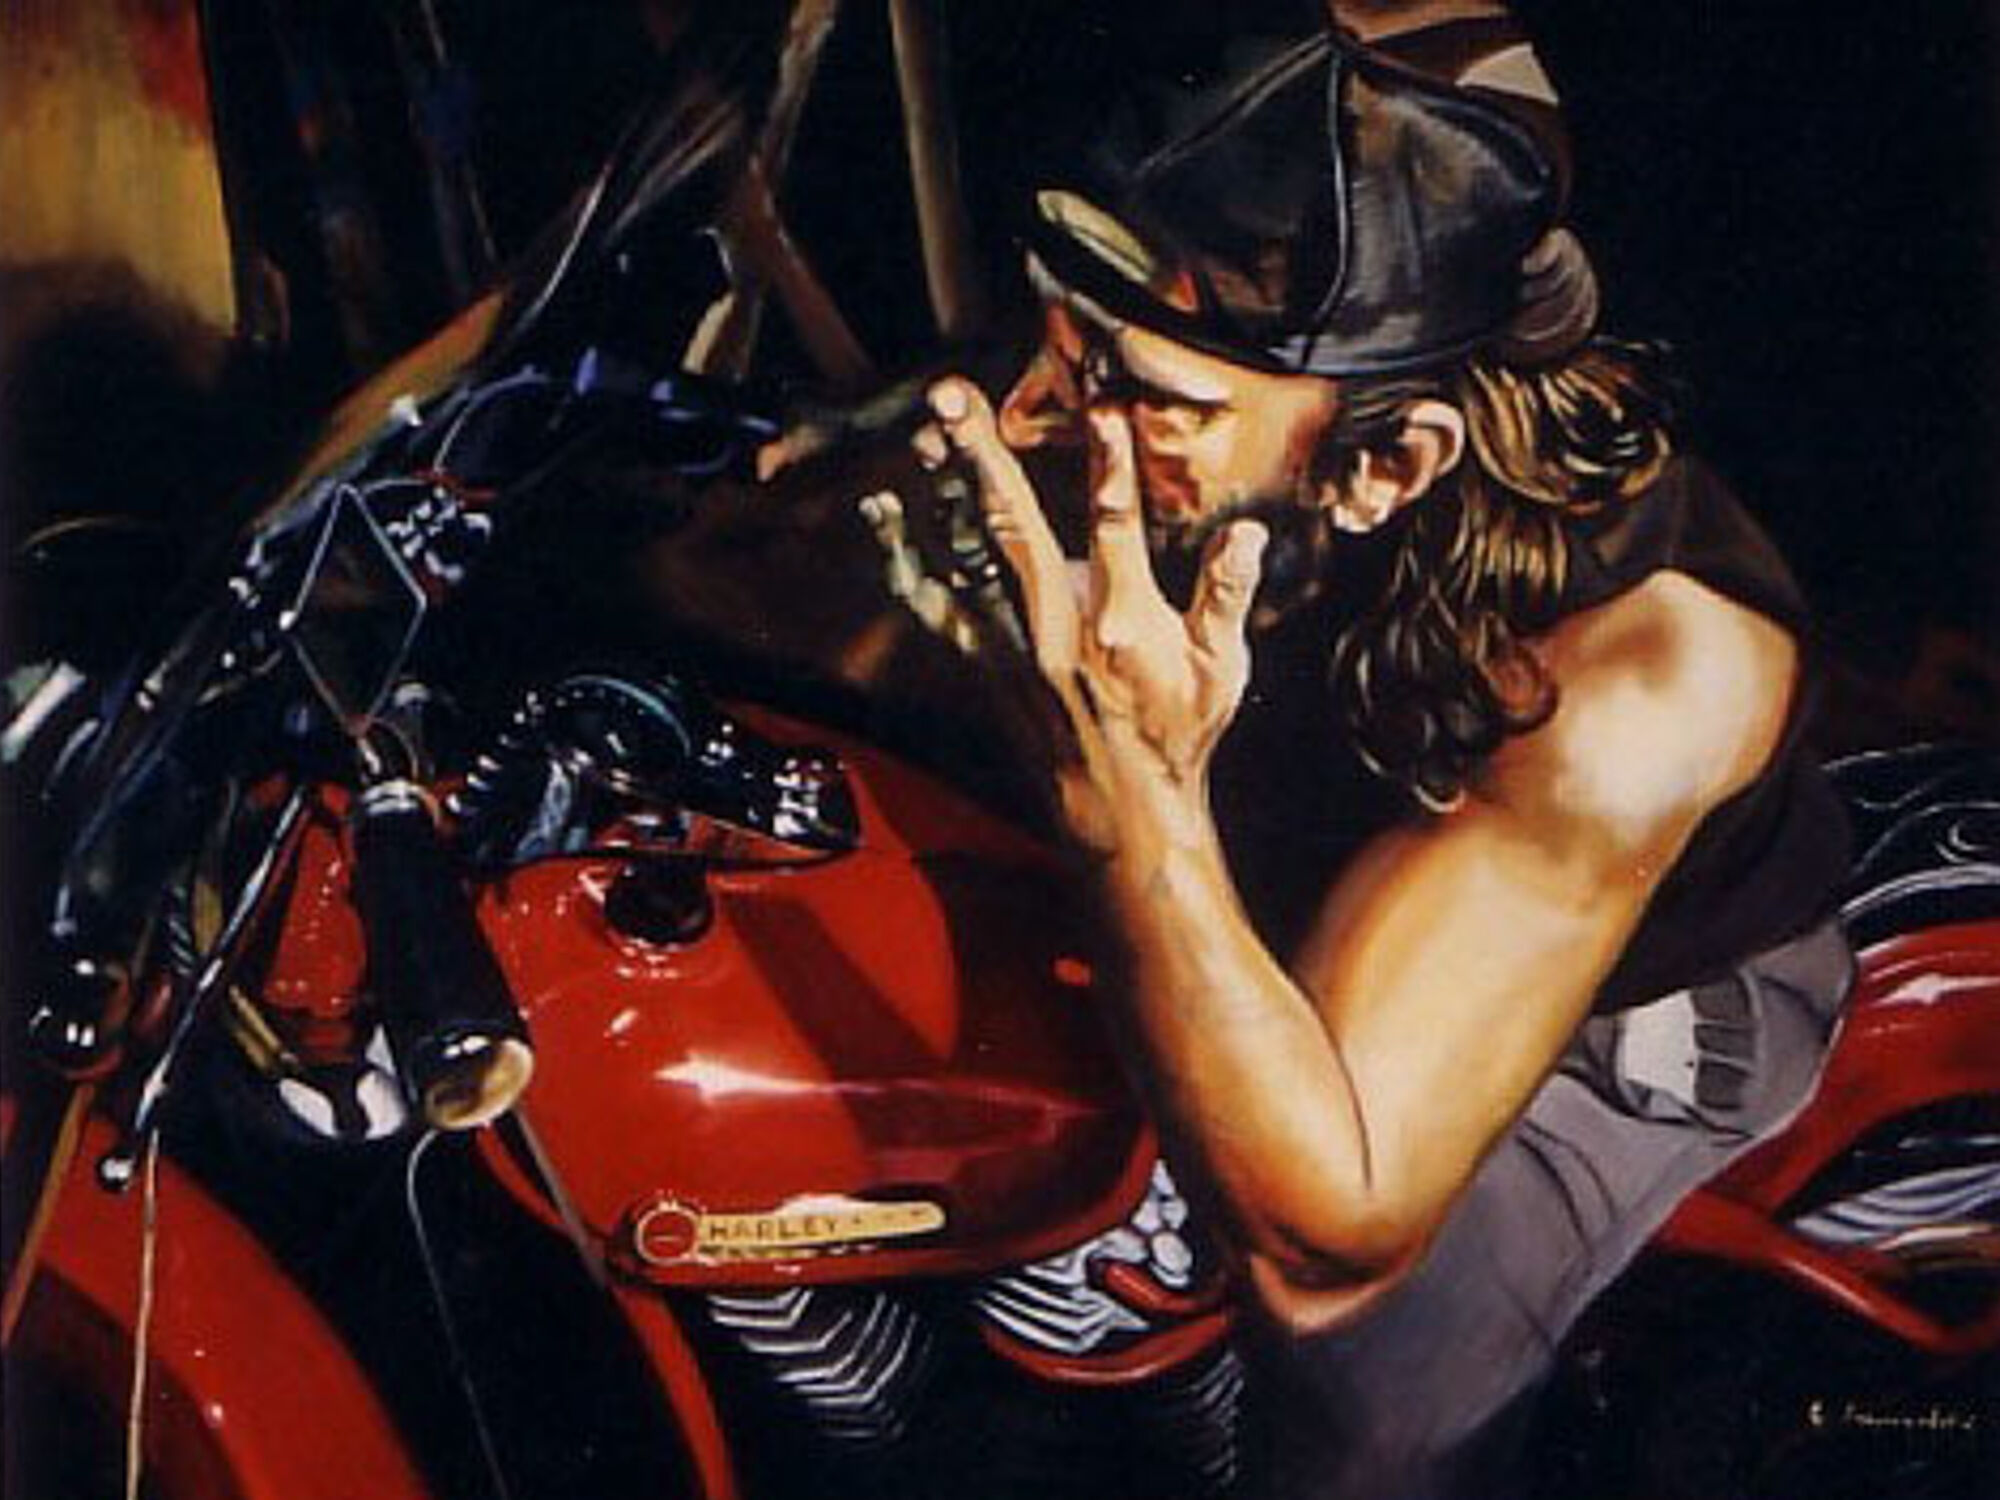 oil painting of a man on a red motorcycle by artist Elli Milan